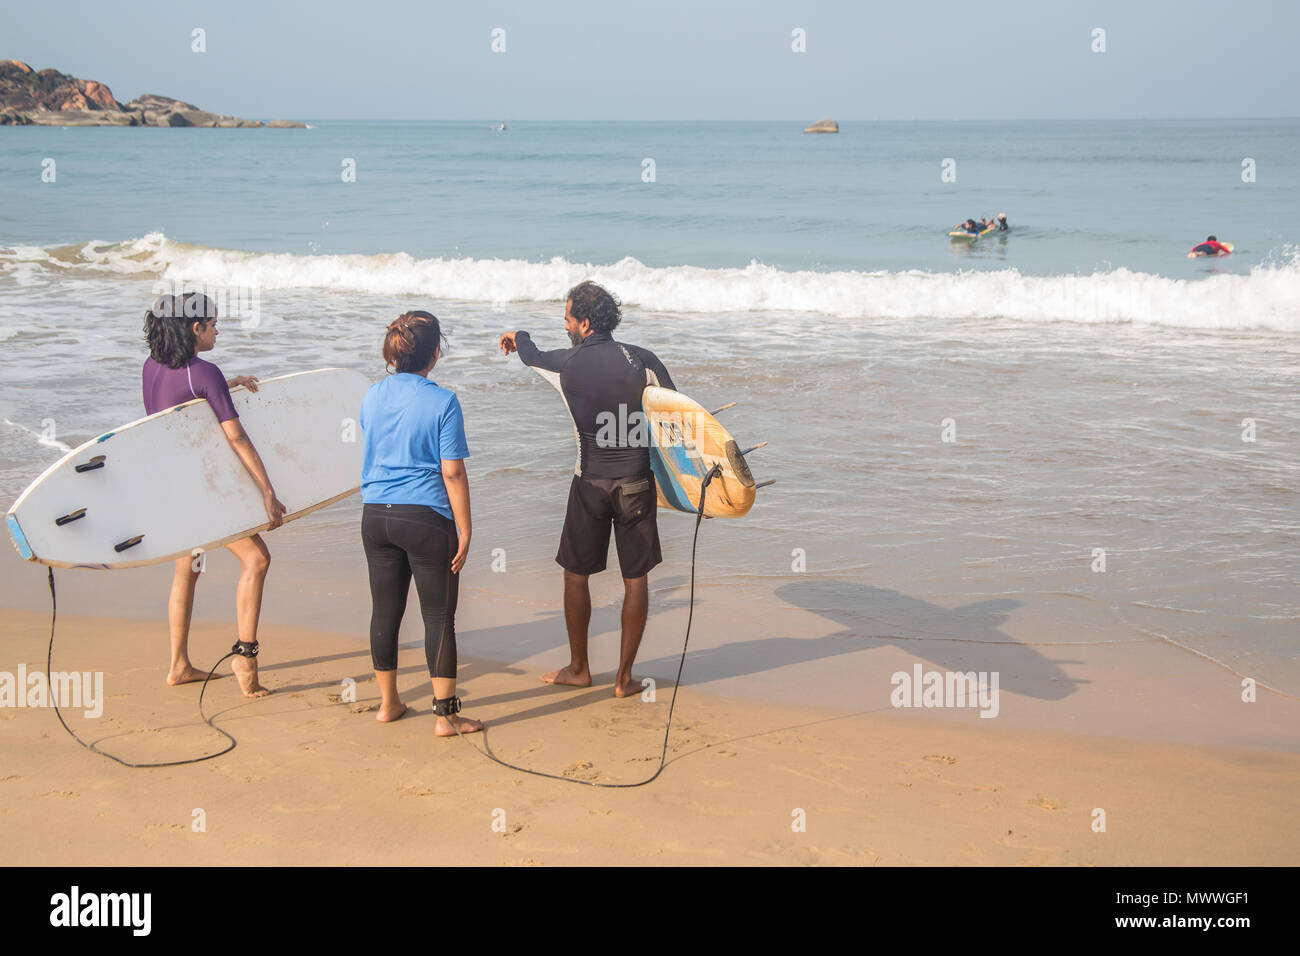 Surf students getting in to the water at a beach in Goa, India, during a early summer session. Stock Photo